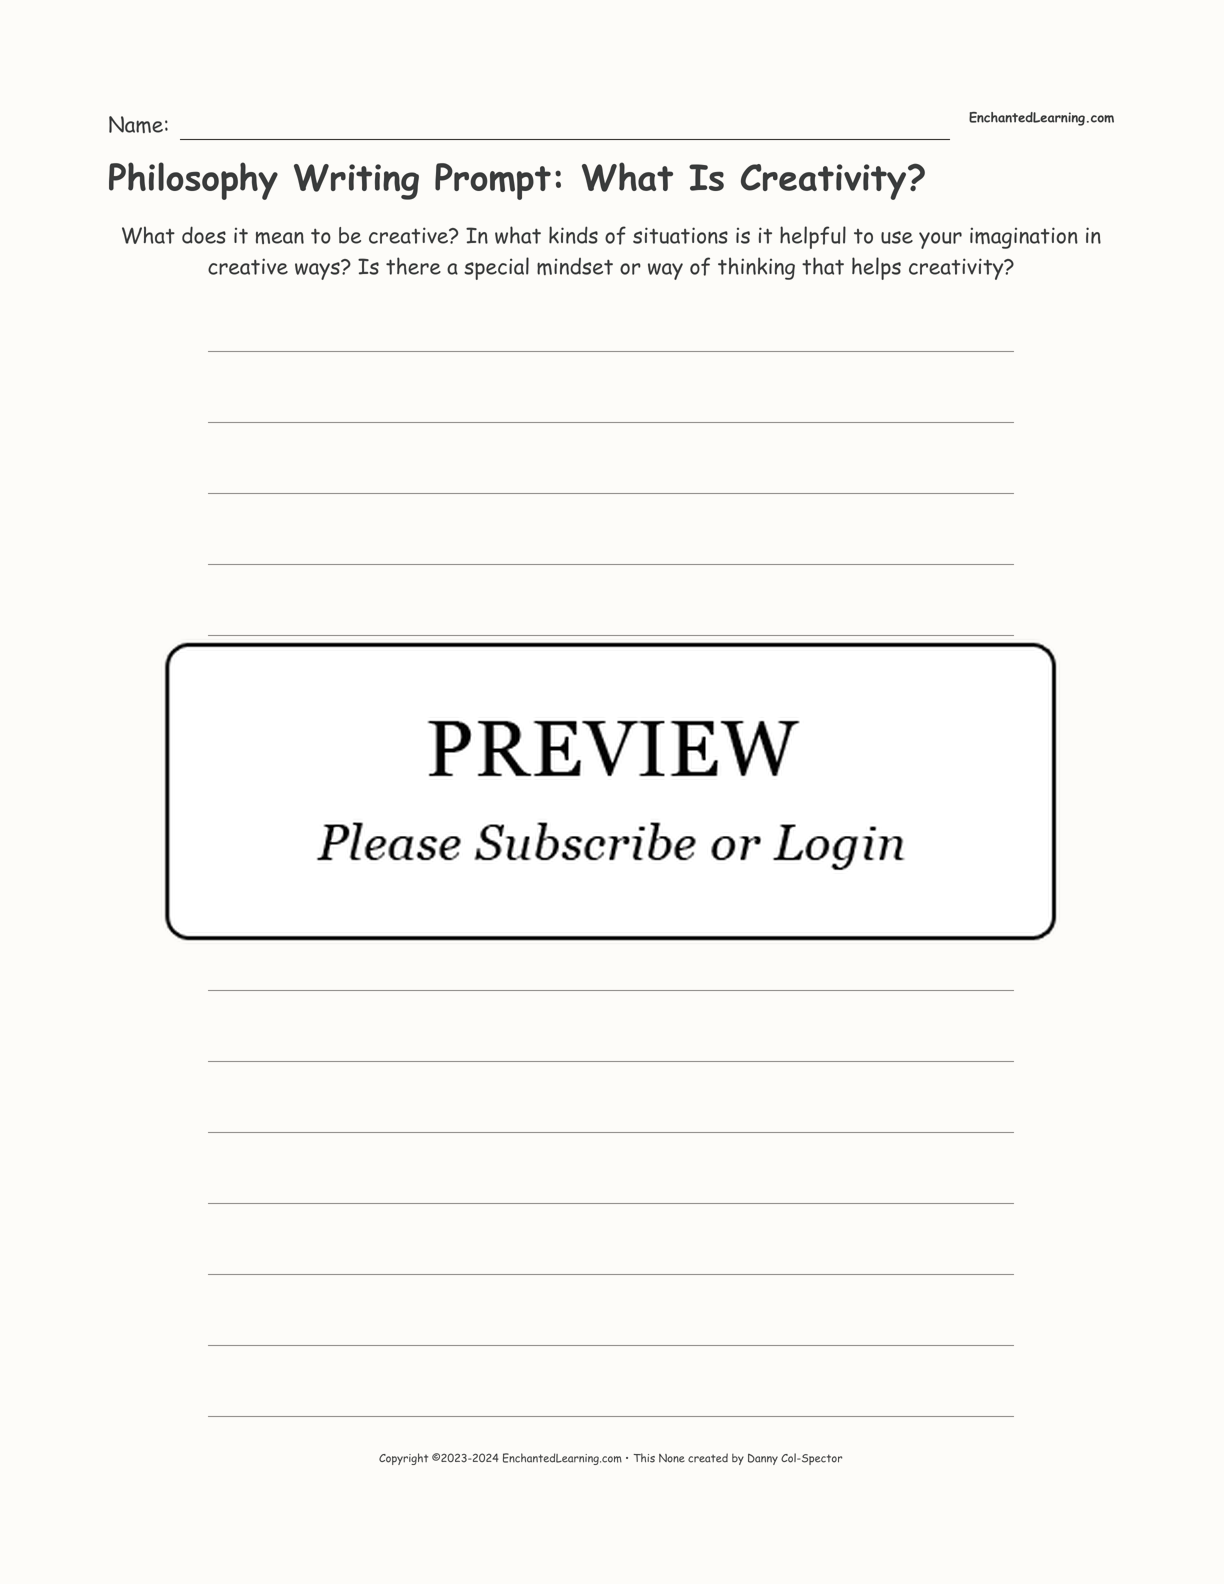 Philosophy Writing Prompt: What Is Creativity? interactive printout page 1